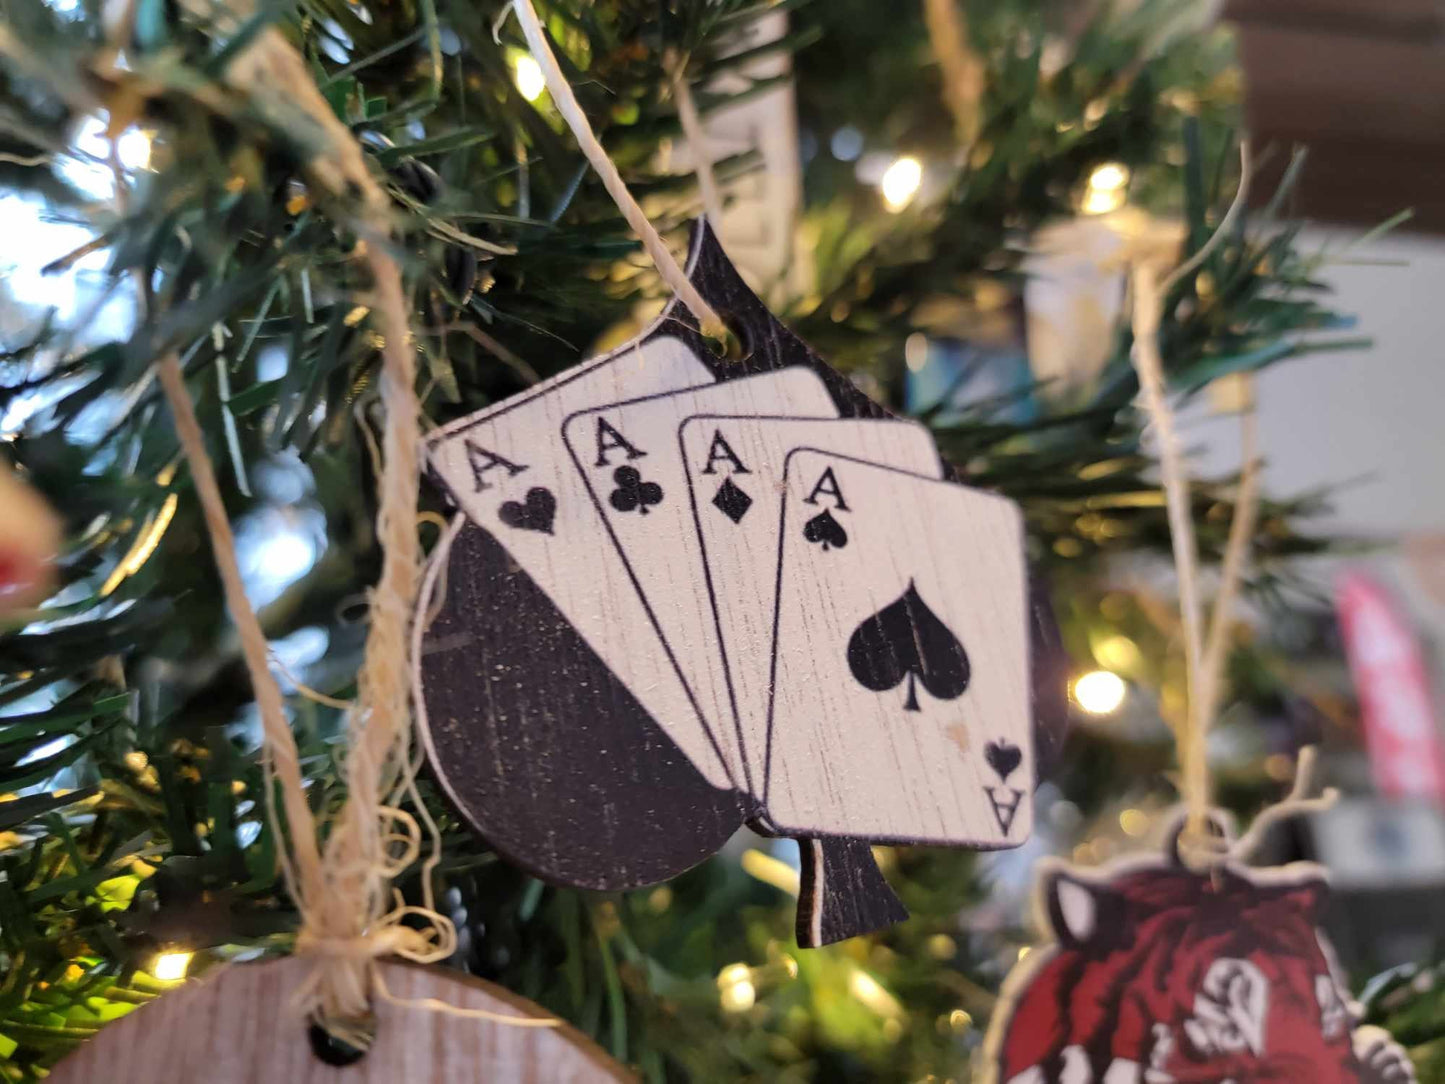 Printed Ornament Spades Black Playing Cards Mascot School Academy Printed Logo Amanda Clearcreek Keychain Decoration Décor Wood Sign Gift